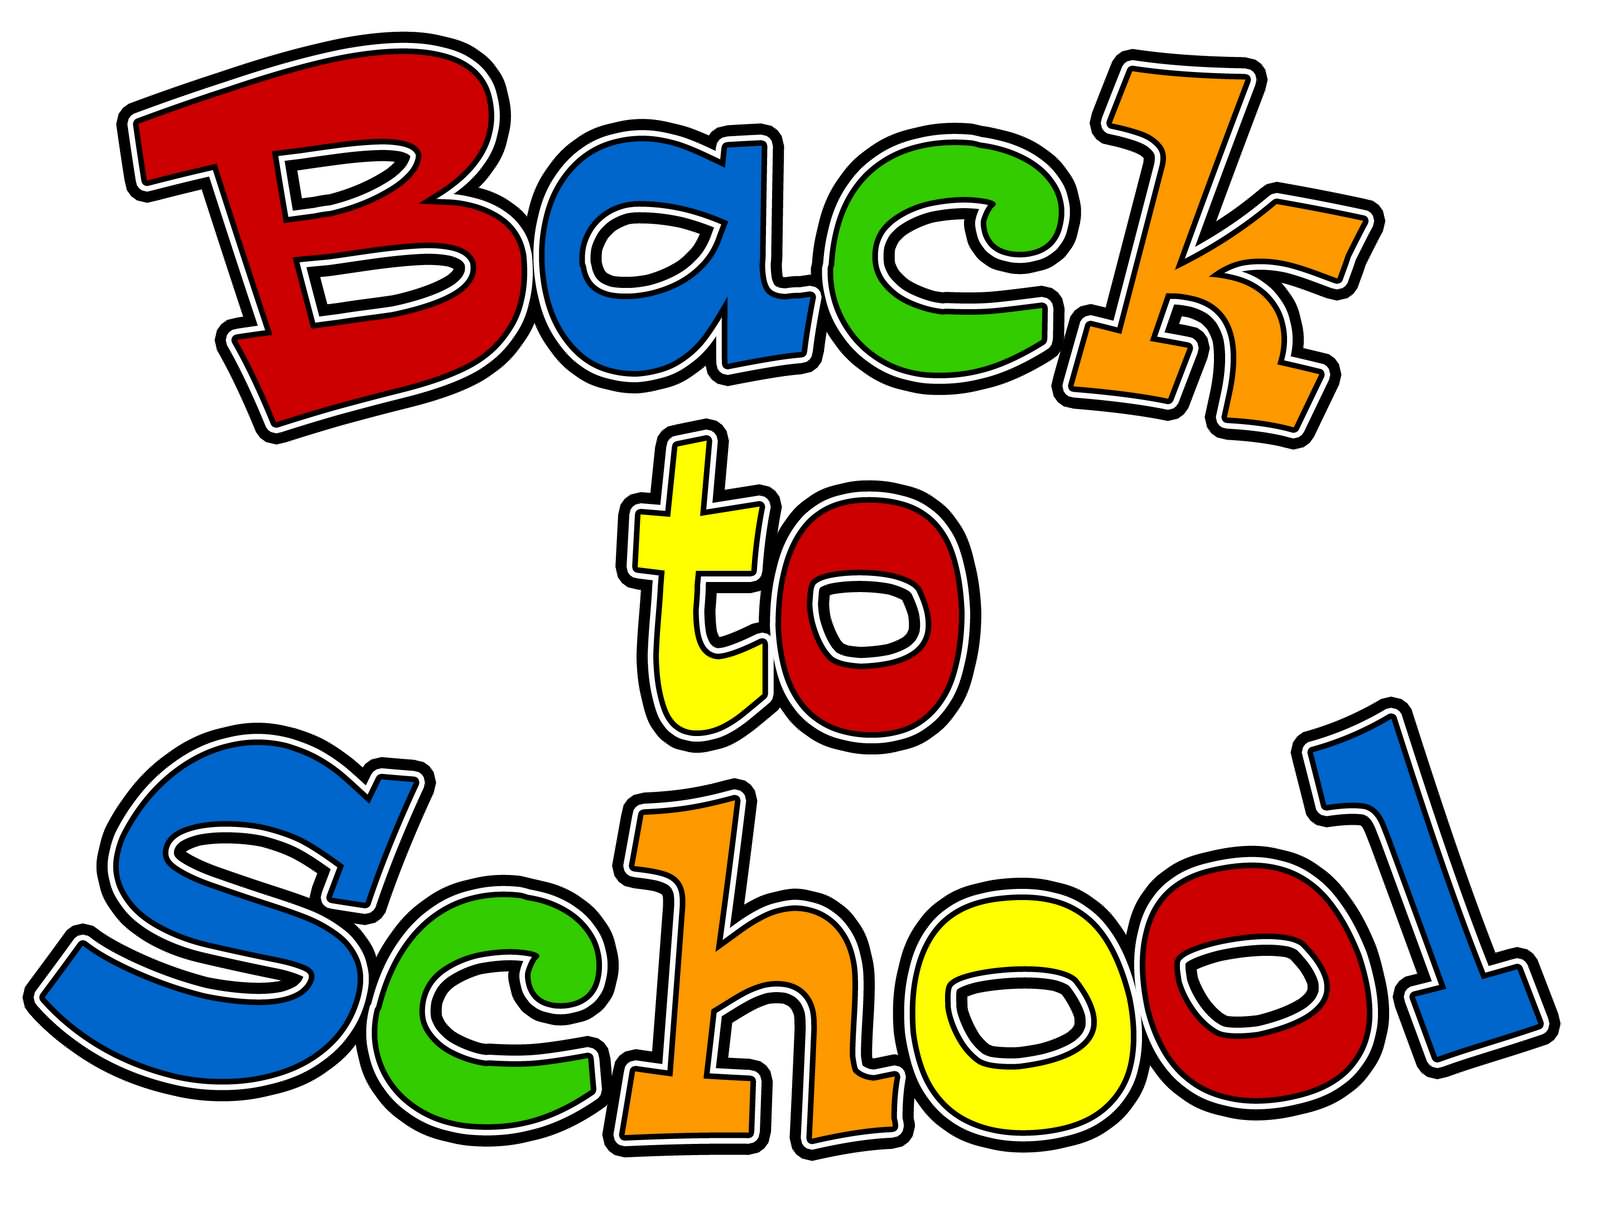 Back To School Colorful Clipart